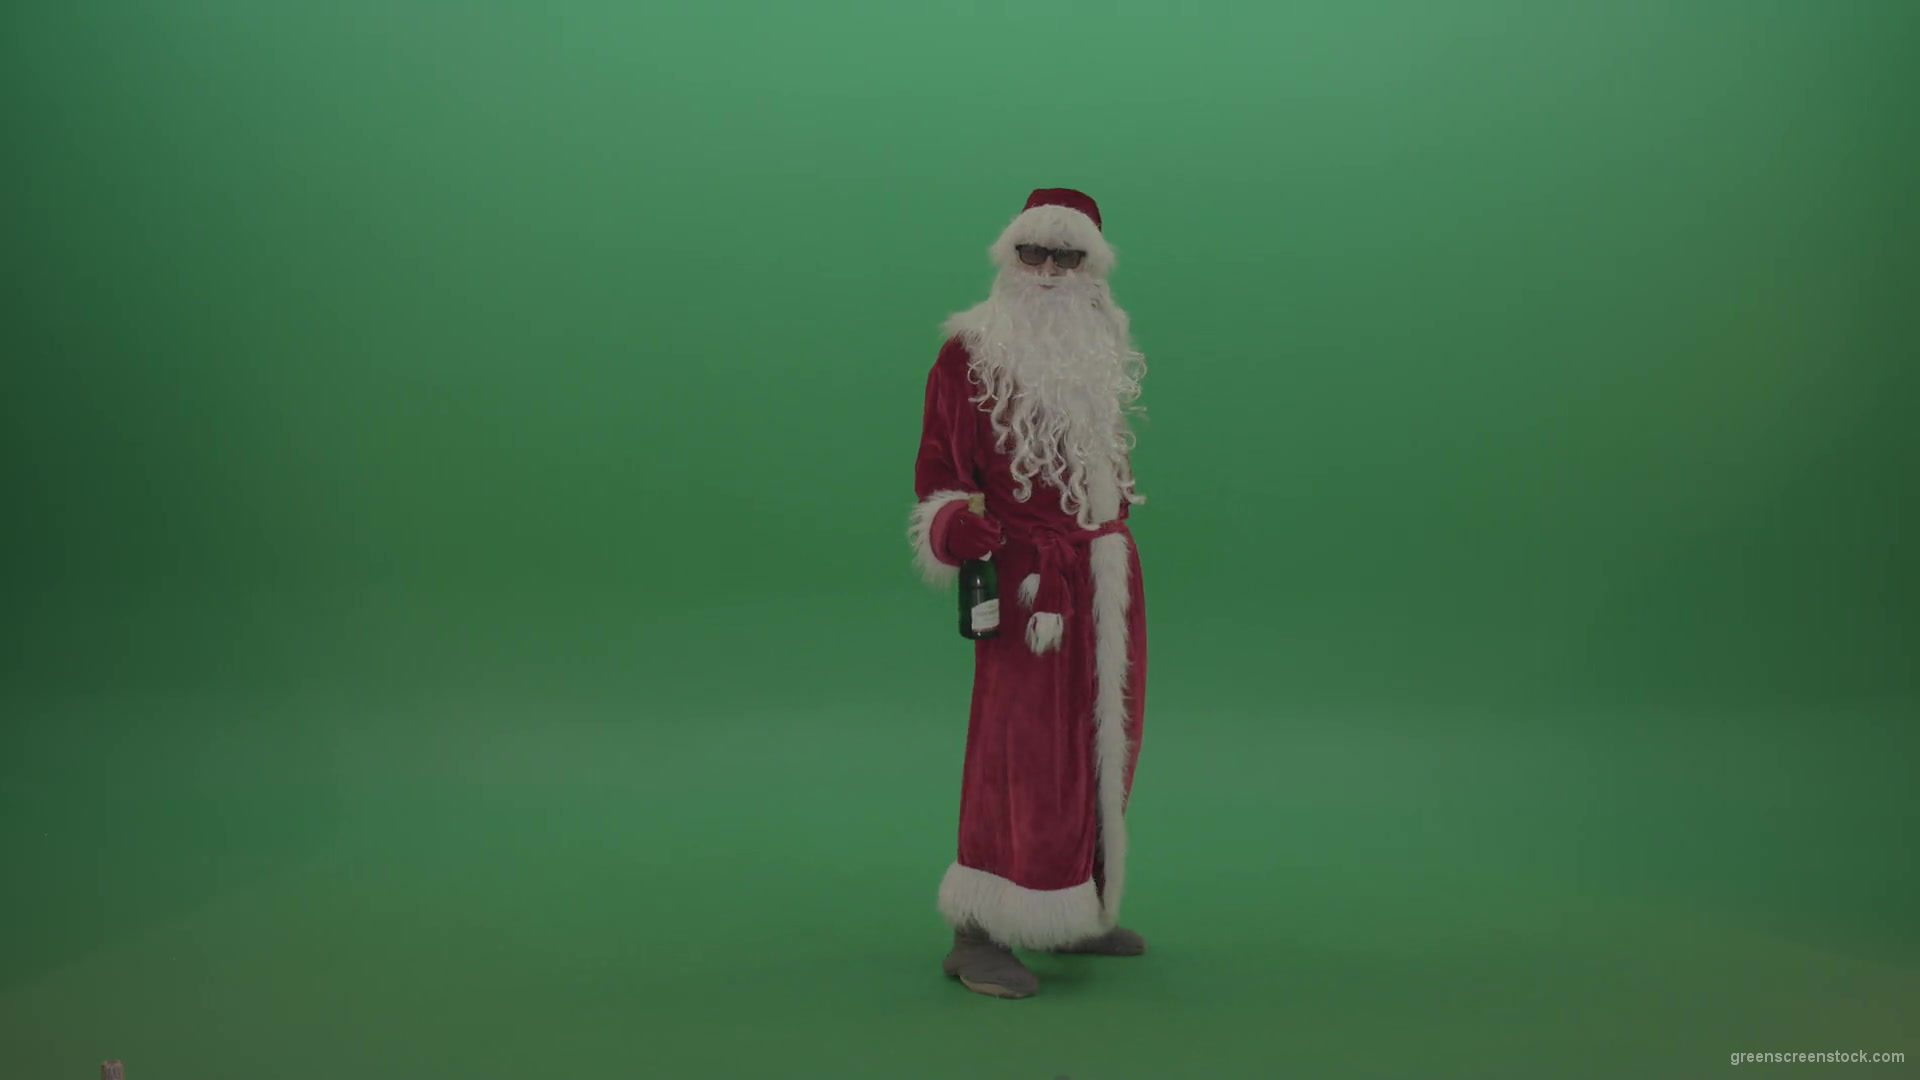 Drunk-santa-in-black-glasses-with-a-bottle-of-wine-staggers-across-the-green-screen-background-1920_005 Green Screen Stock